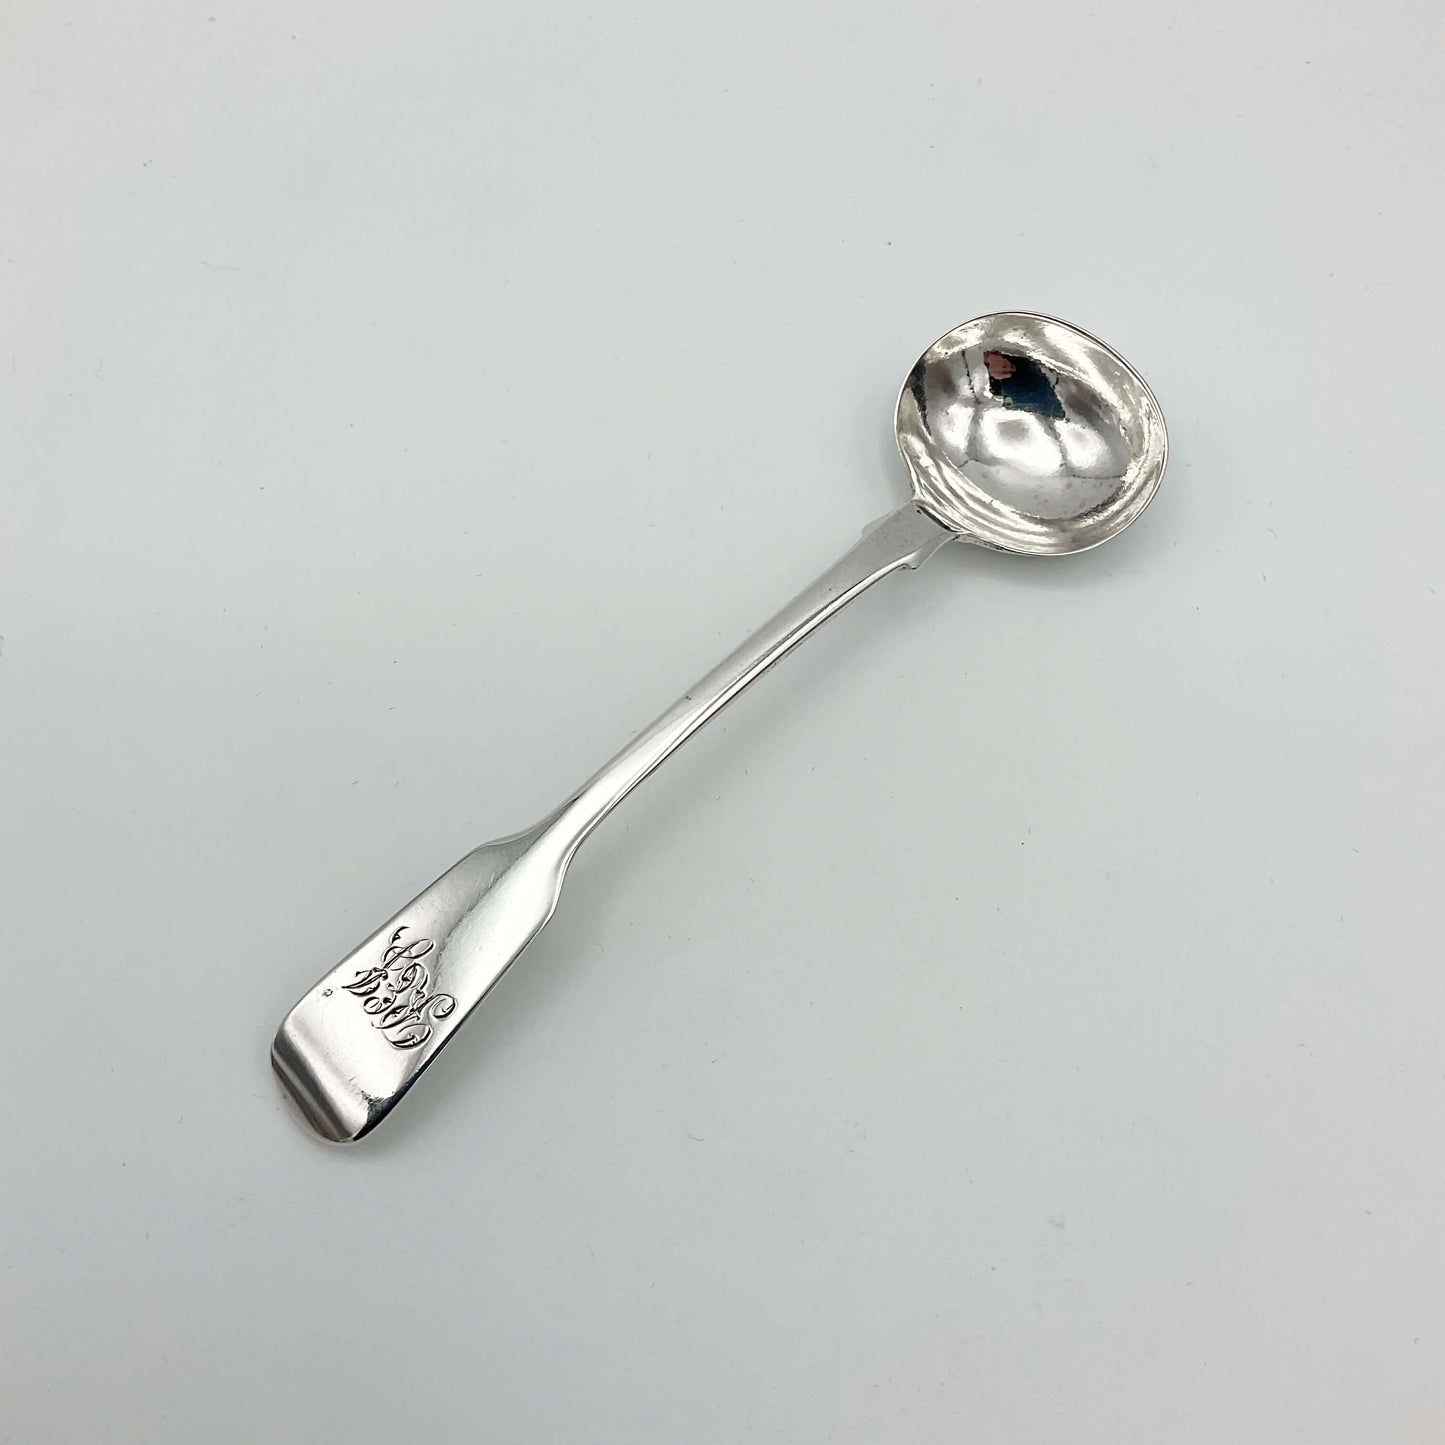 Antique silver condiment spoon on a white background 